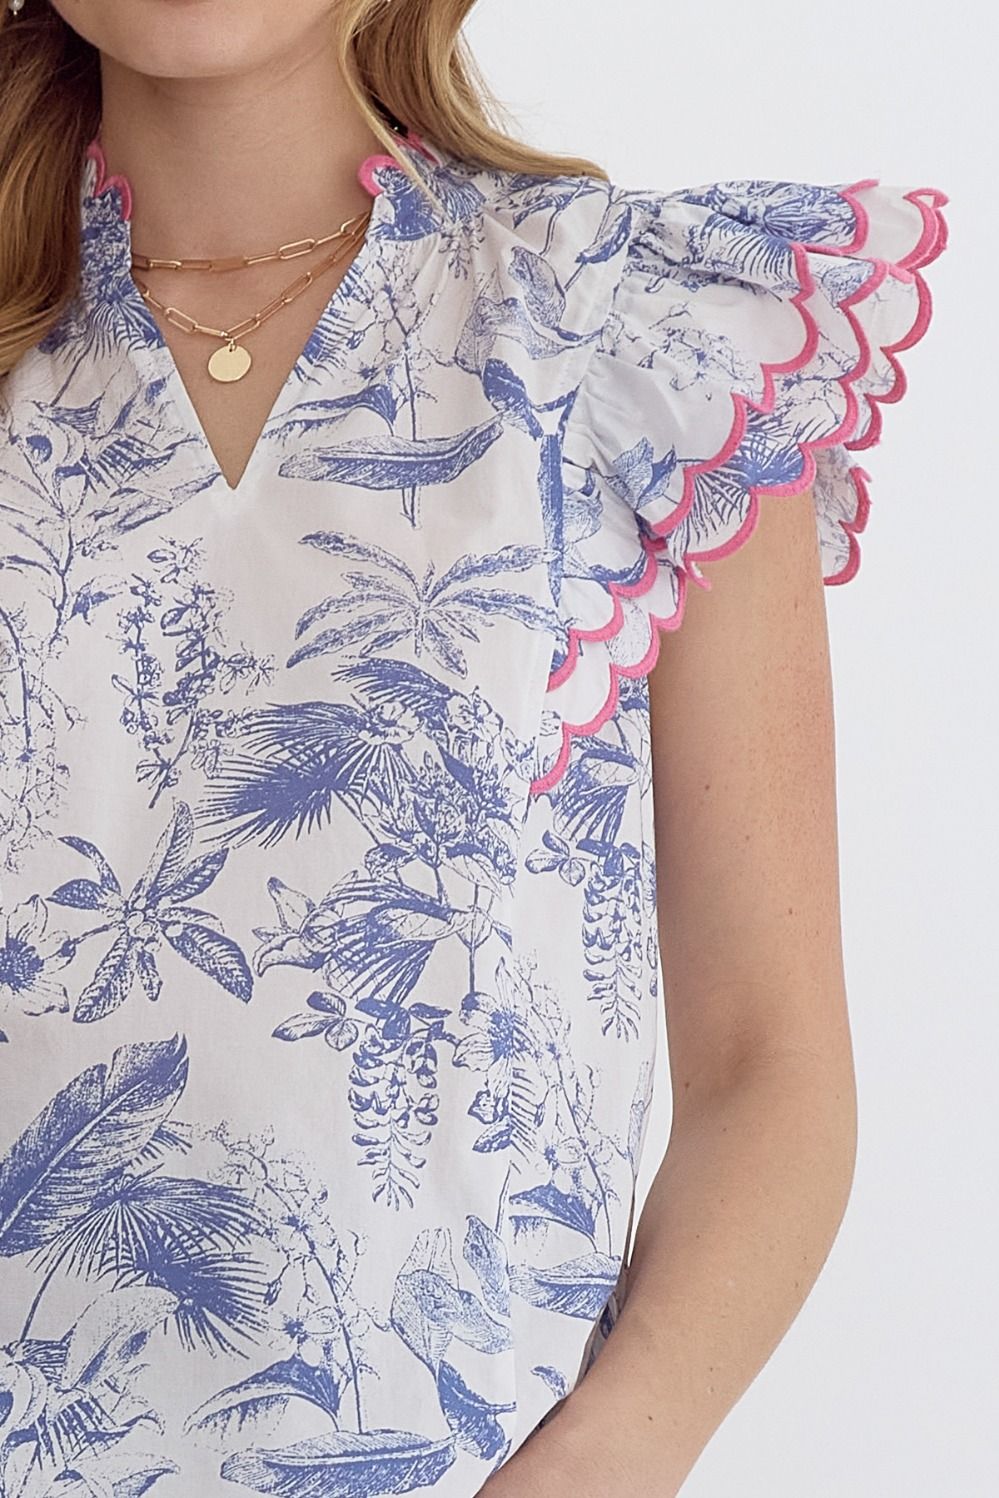 Flutter Sleeve Top - Blue and Pink Toile